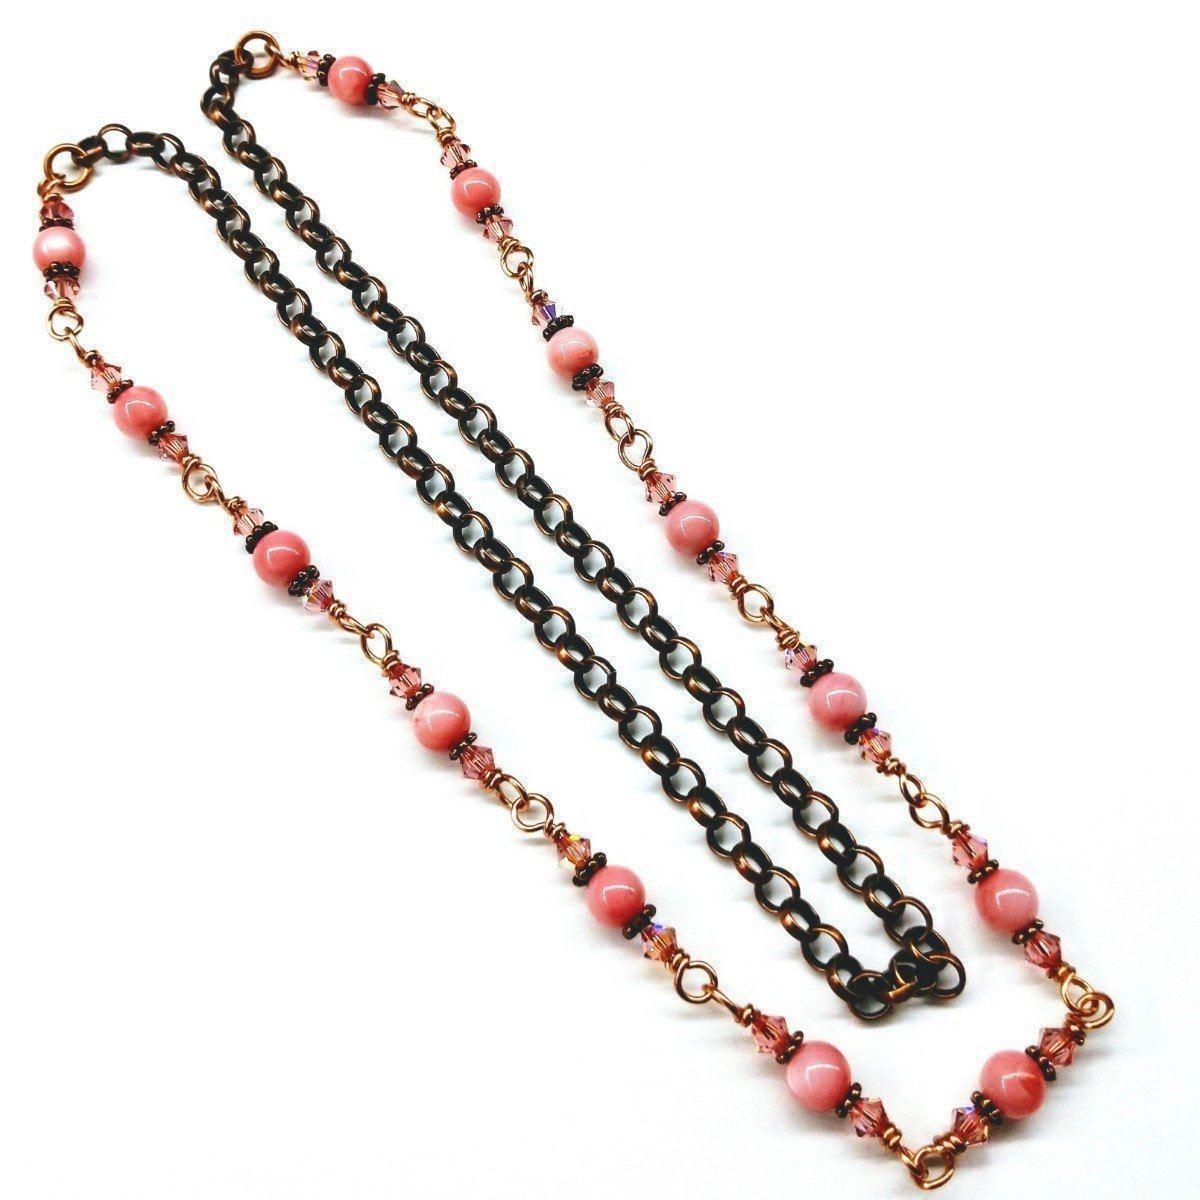 Copper Peach Pearl Crystal Wire Necklace - Handcrafted 24 Inches in Length with Swarovski Crystals and Mother of Pearl Beads Bijou Her